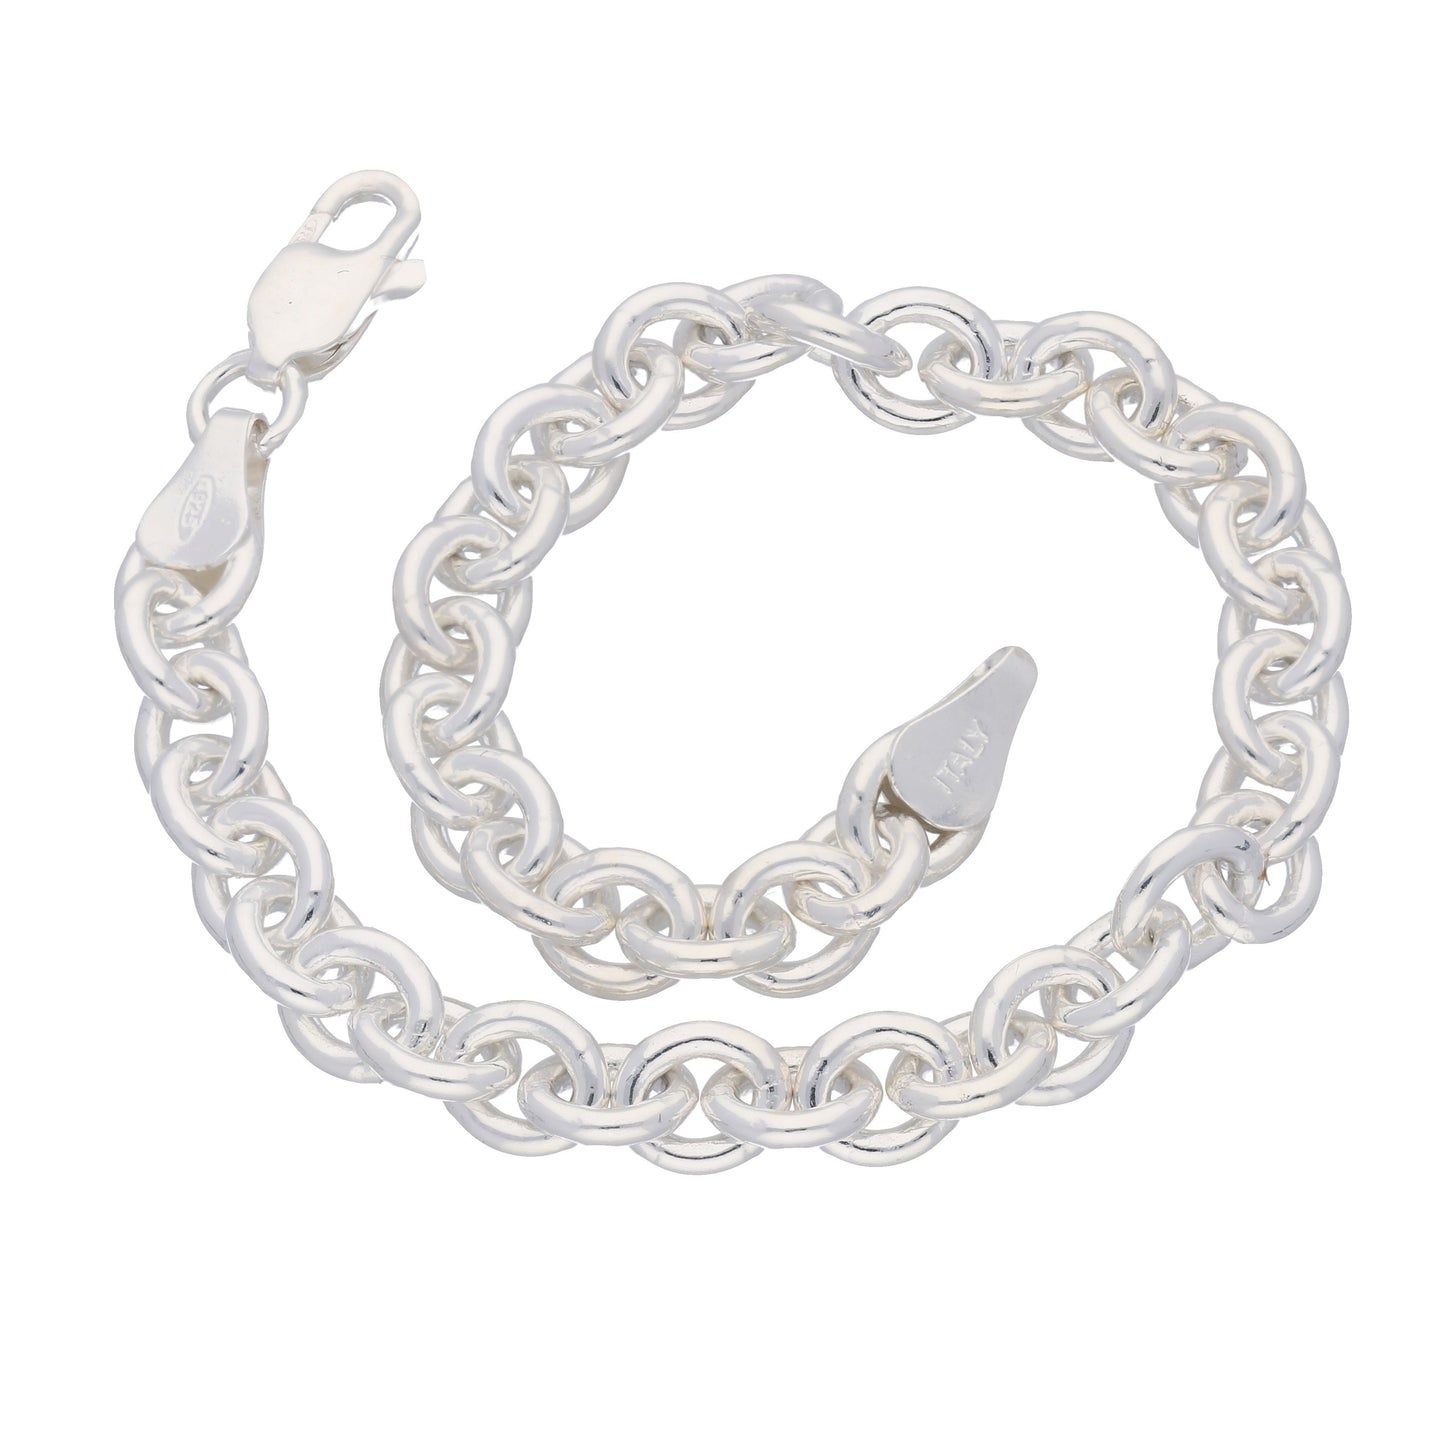 Cable Link Chain Bracelet, Sterling Silver, 6mm Wide - 7", 7.5", 8" Lengths